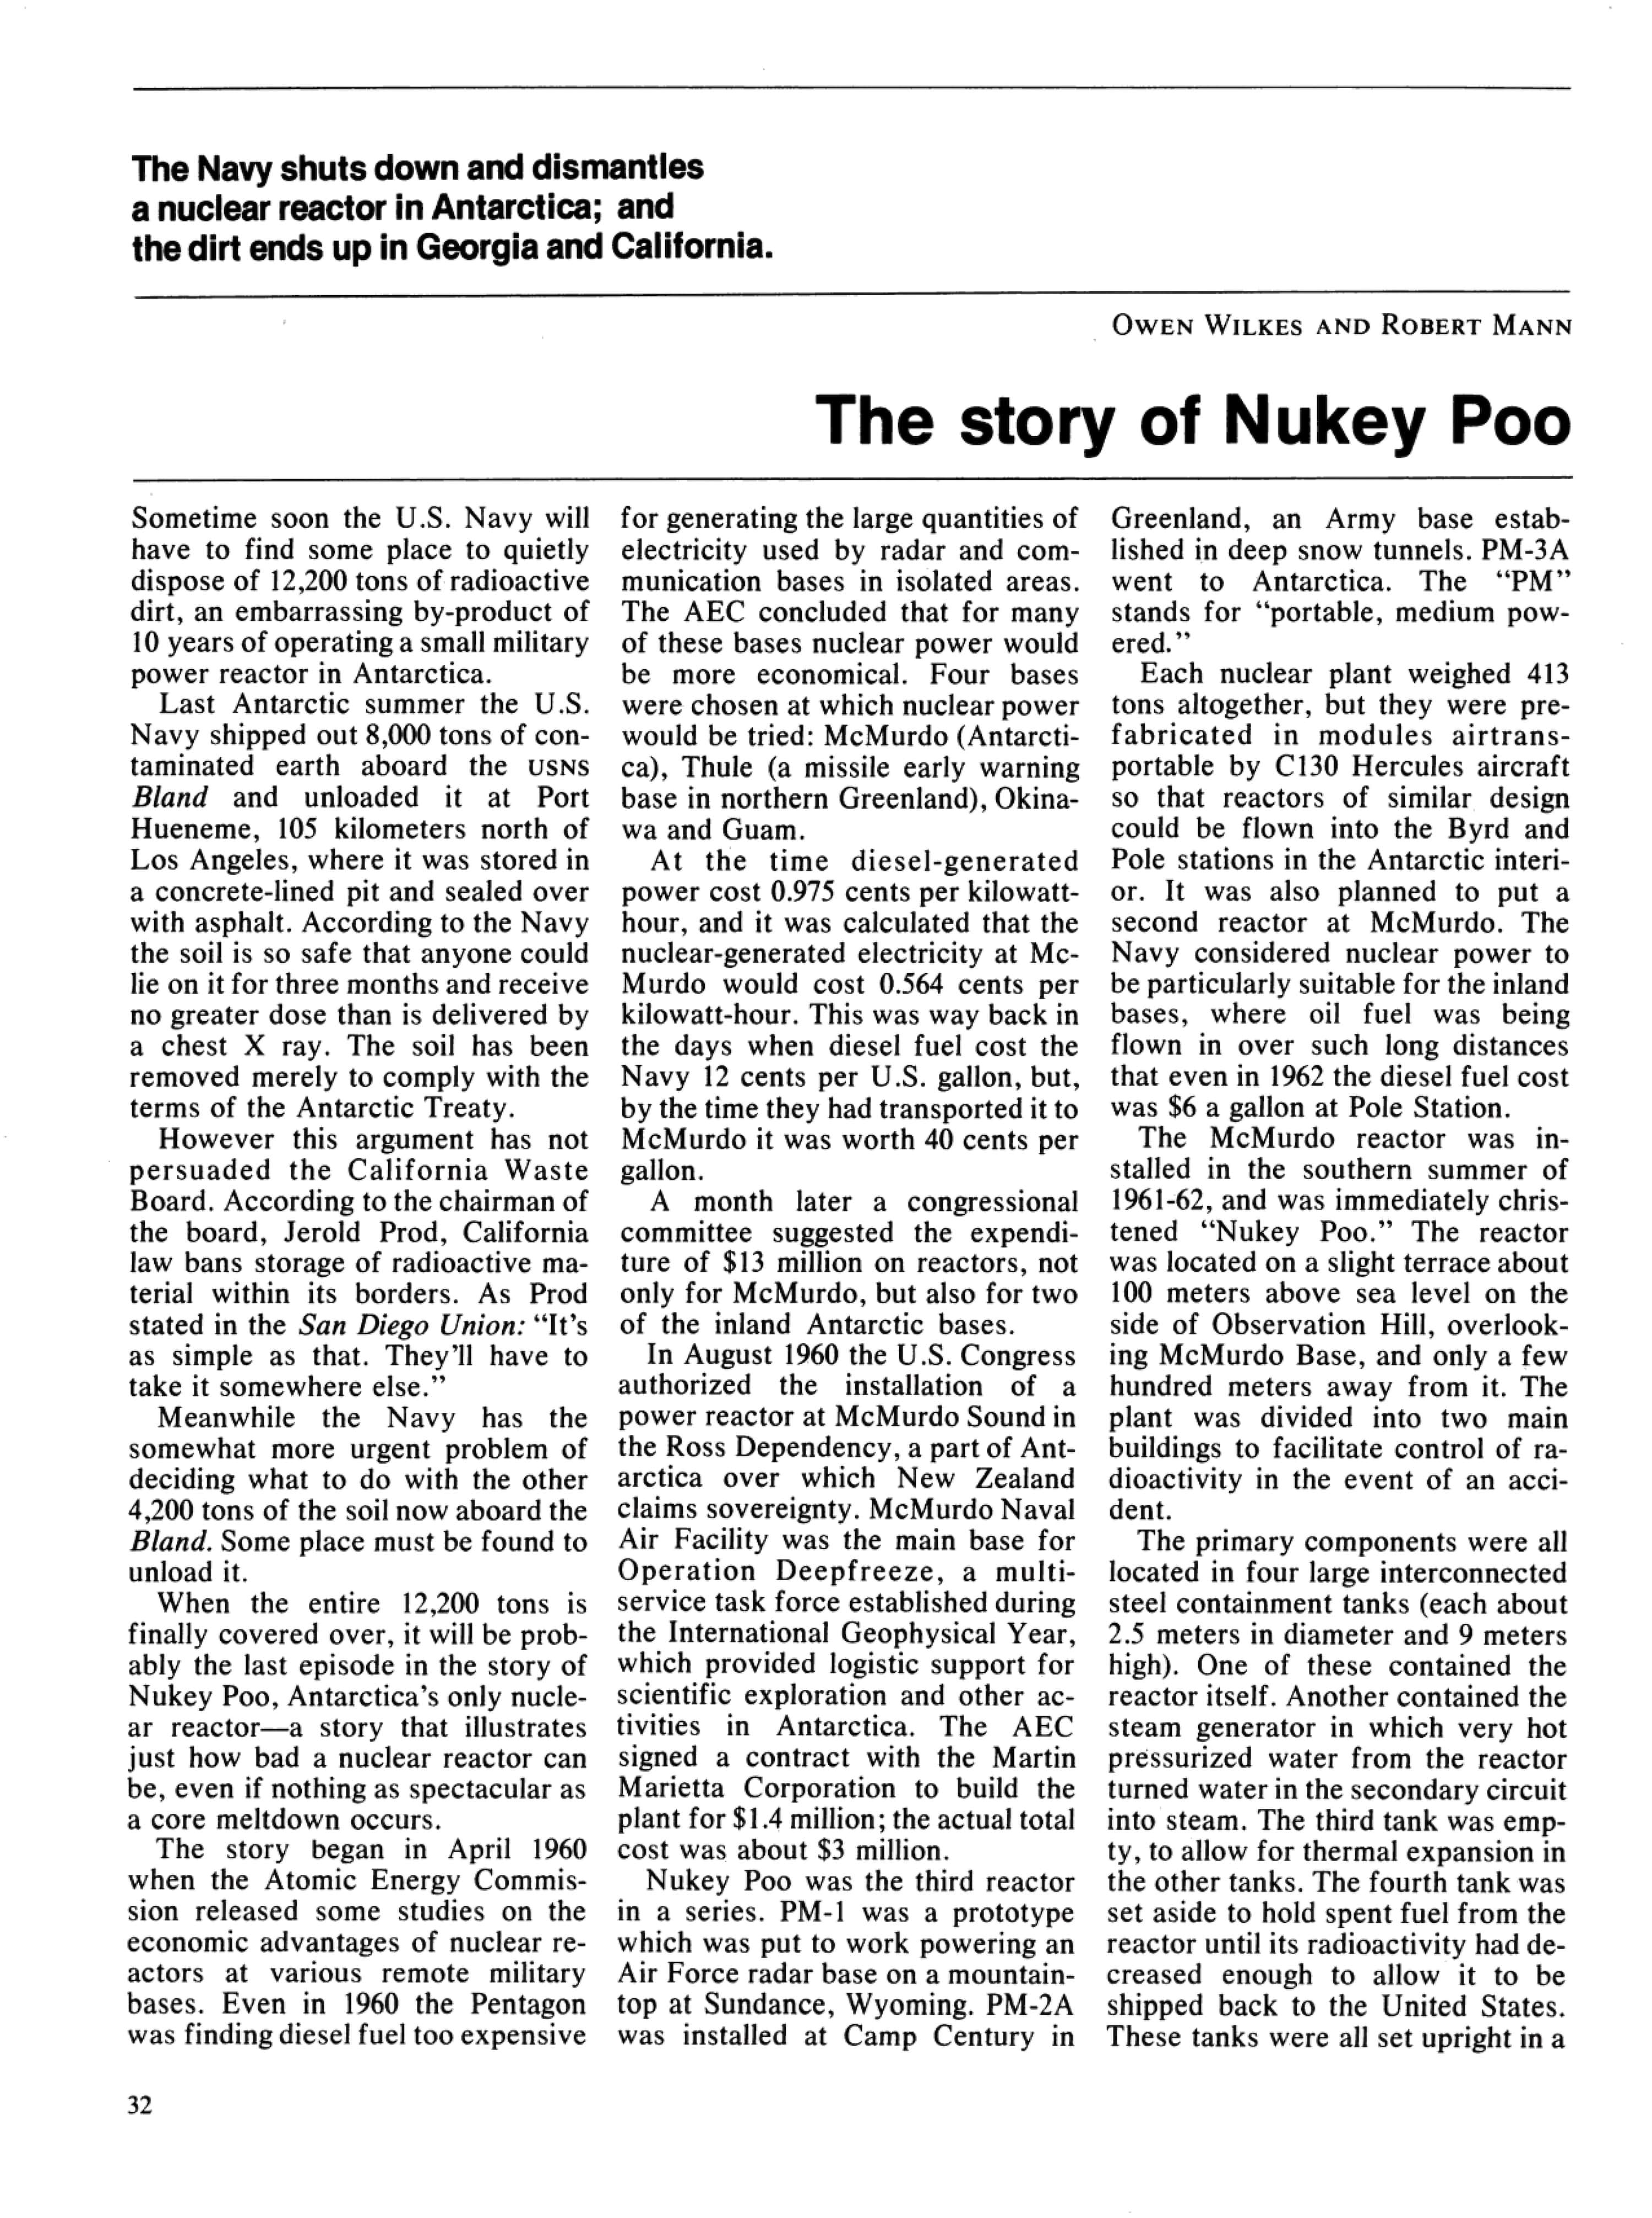 The story of Nukey Poo as it appeared in the Bulletin of Atomic Scientists.